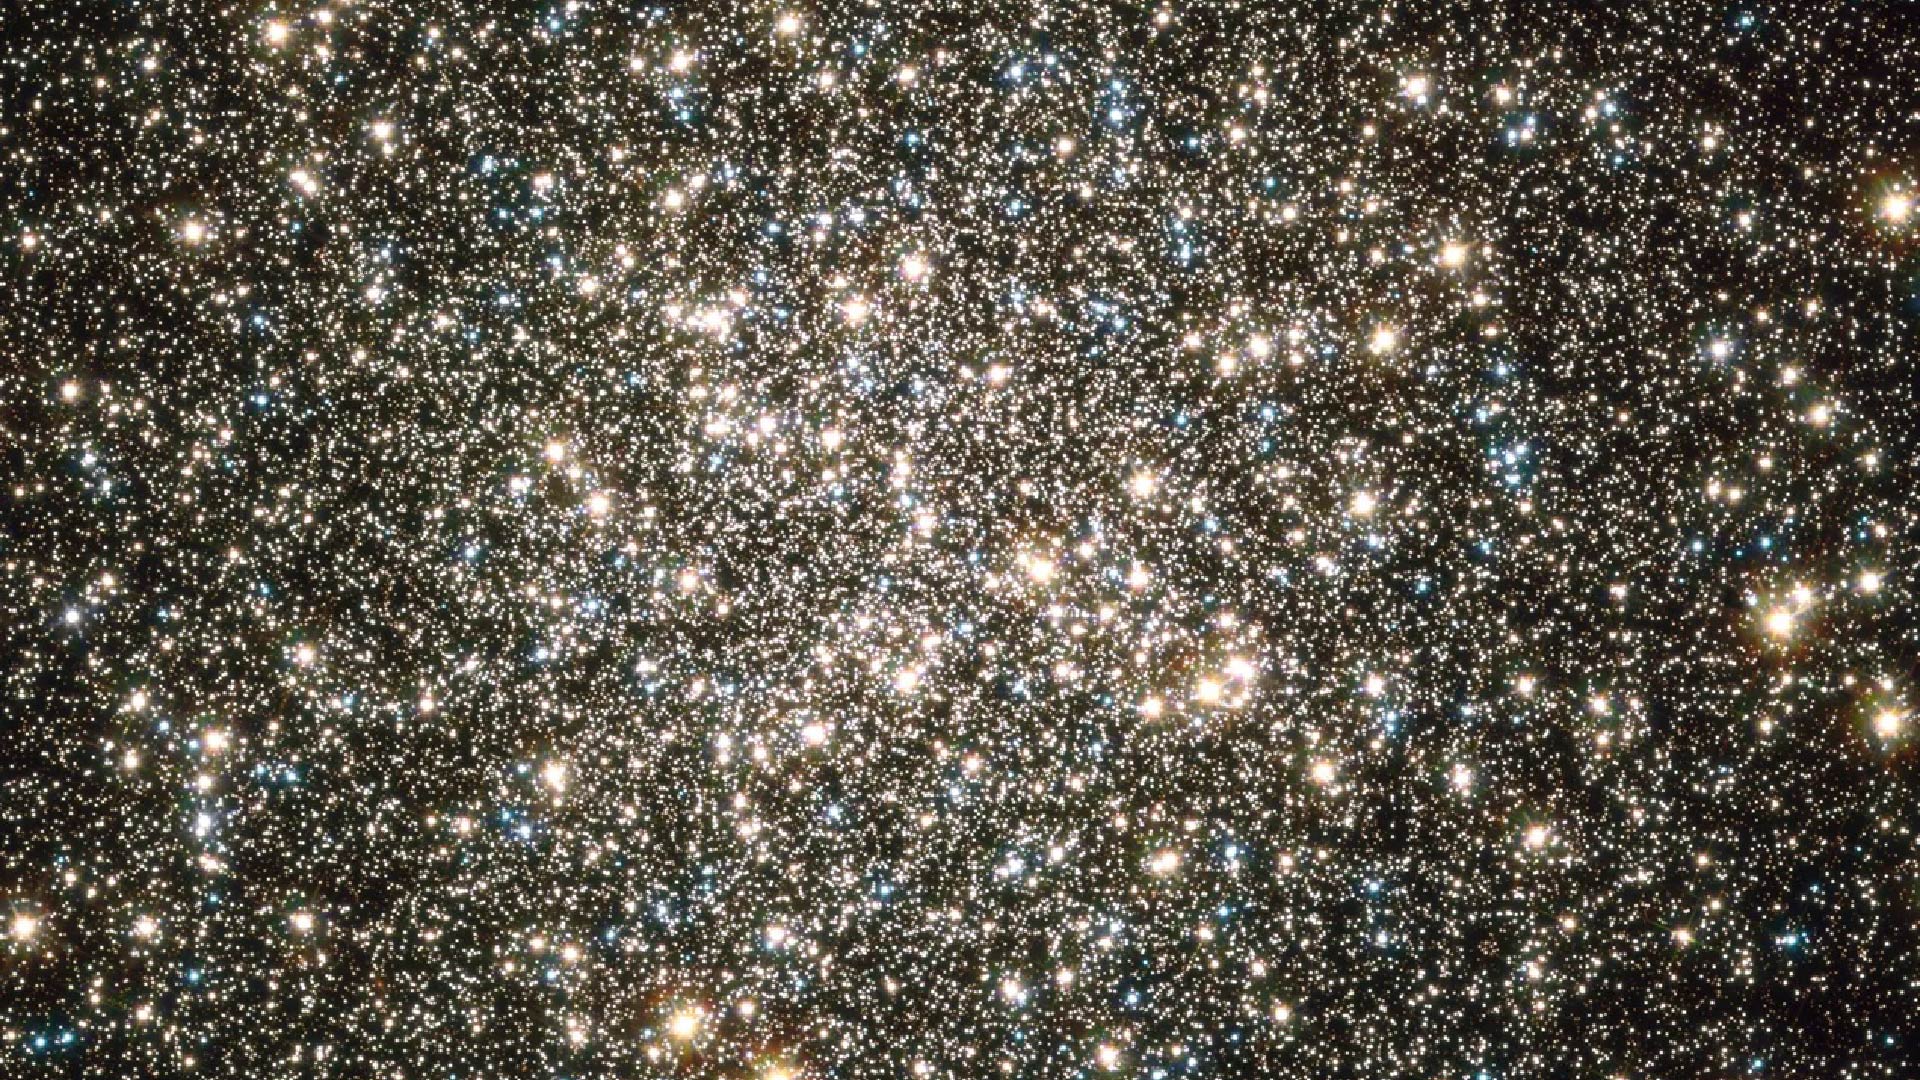 An image of over 100,000 stars in the M13 cluster